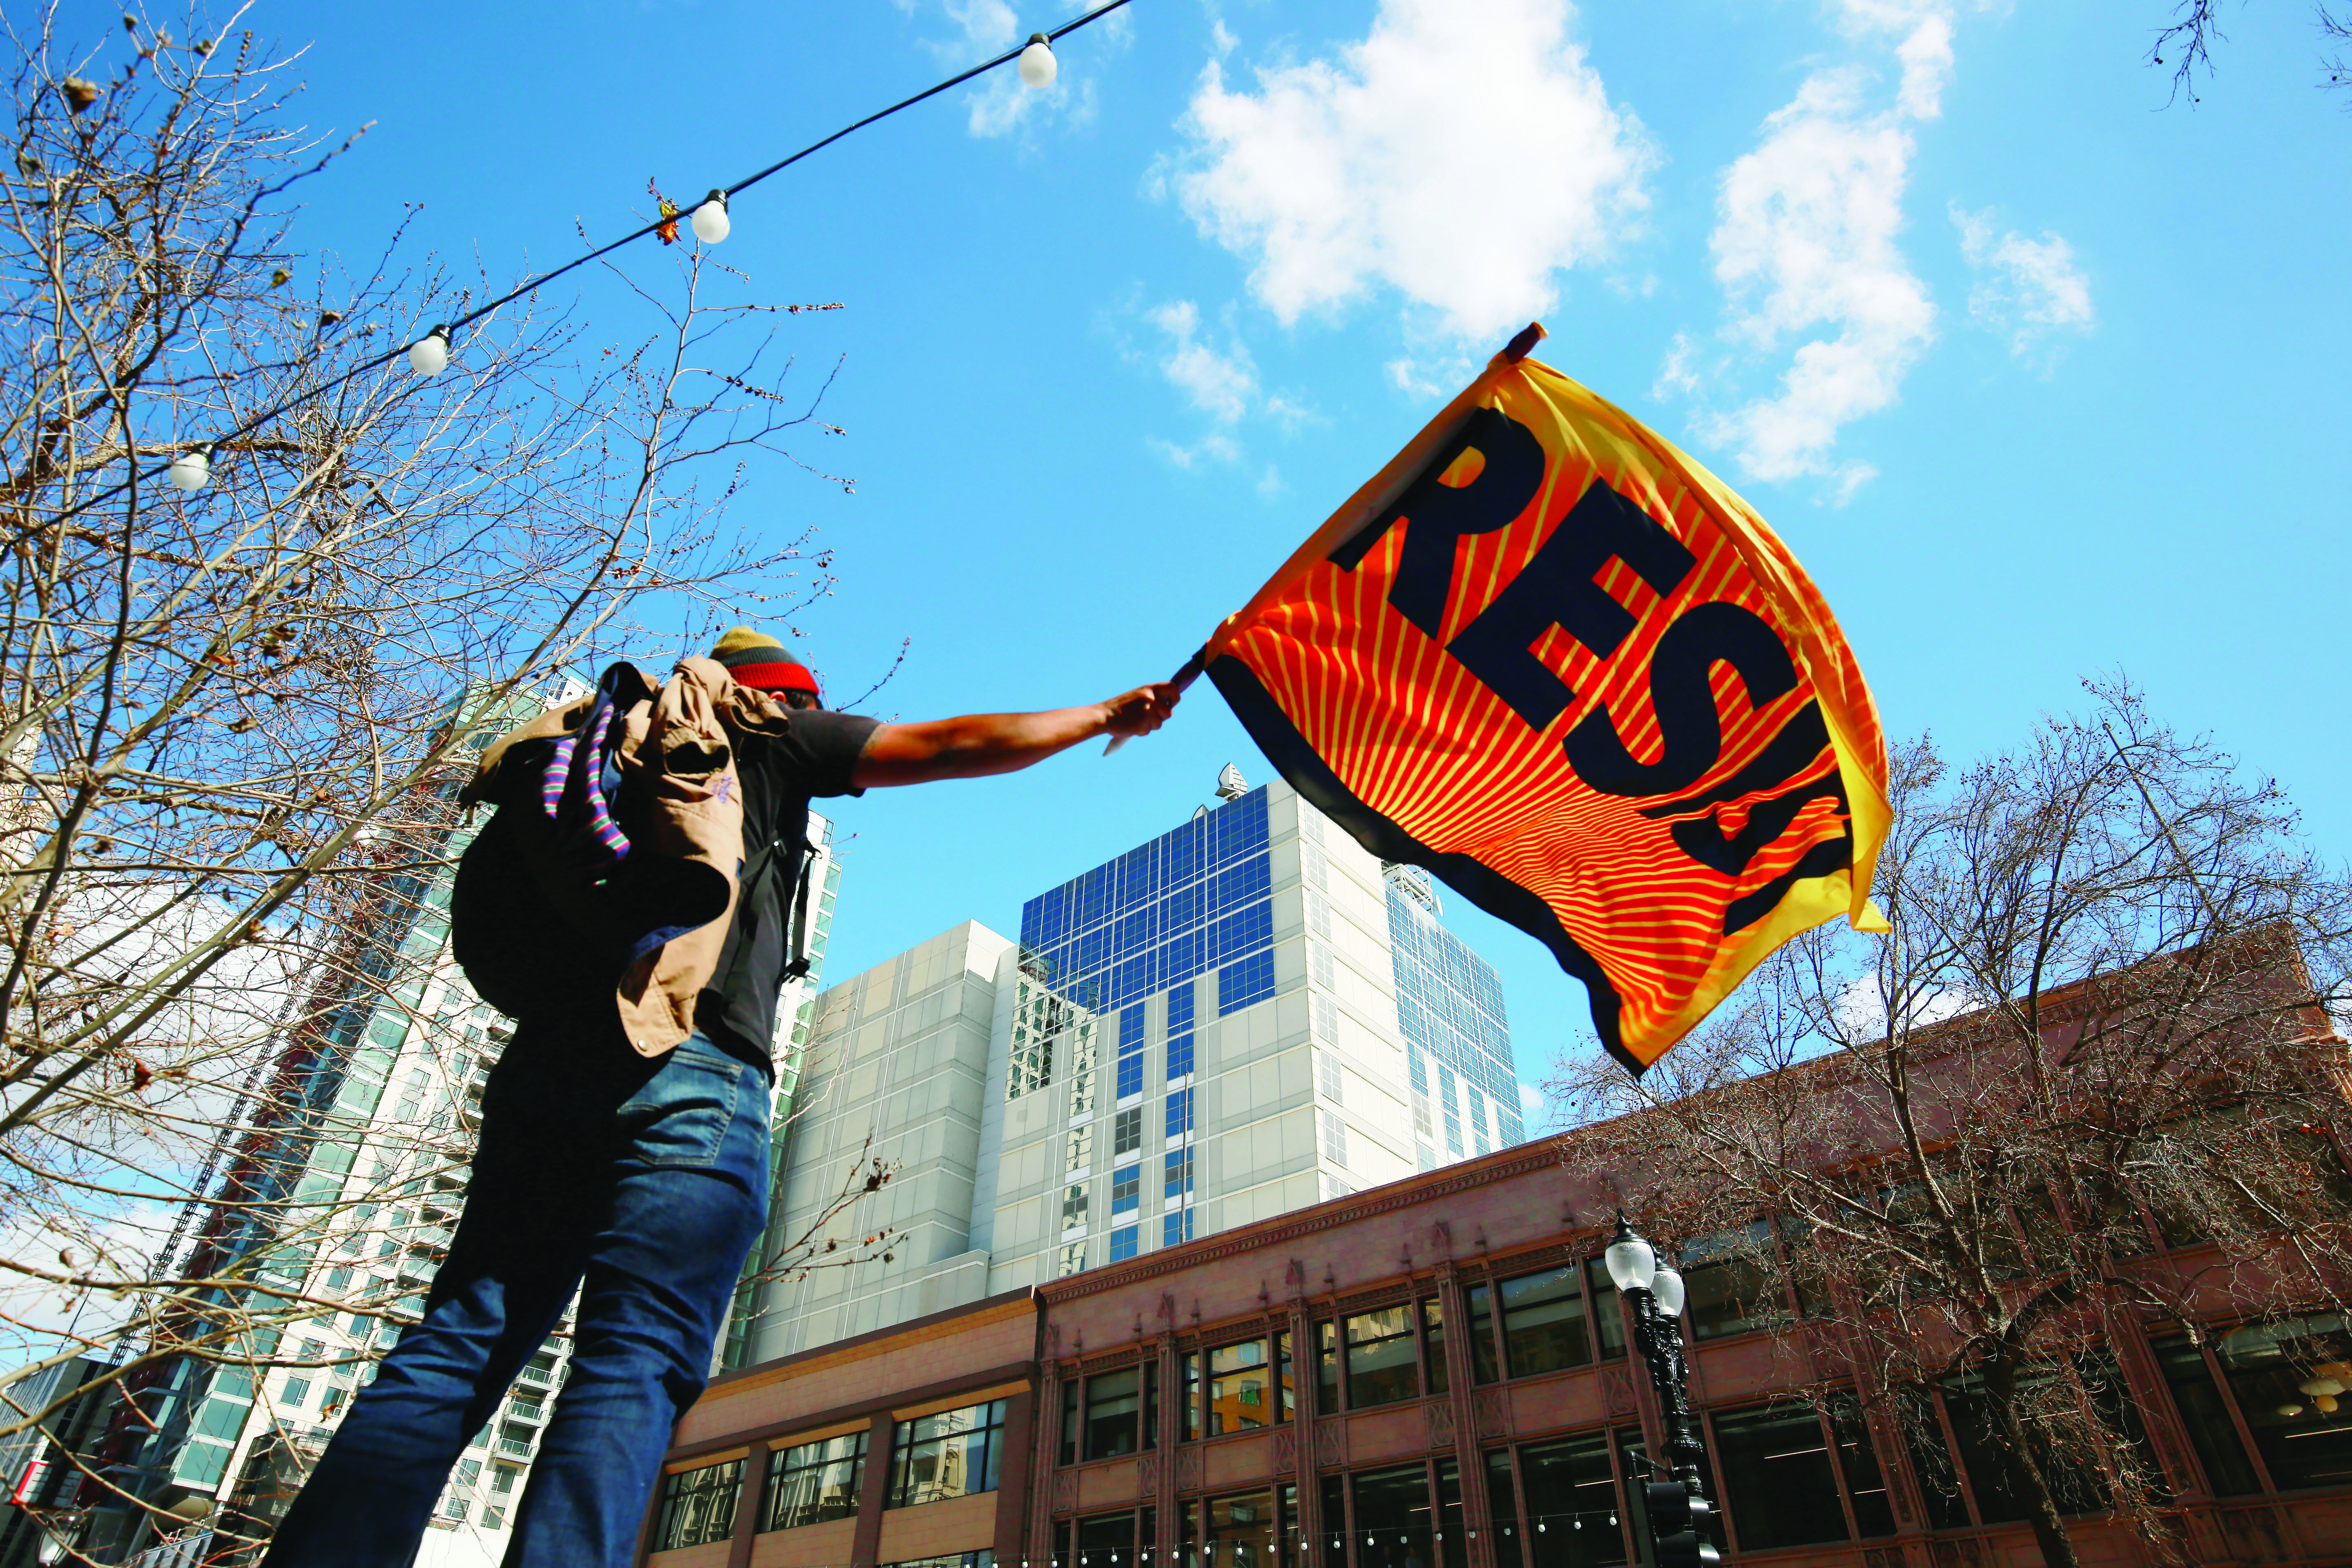 Eliseo Cañete, science teacher at Castlemont High School, waves a Resist flag over a city-wide rally in Downtown Oakland, California on the sixth day of the Oakland Teacher Strike Feb 28, 2019. (James Chan/Golden Gate Xpress)